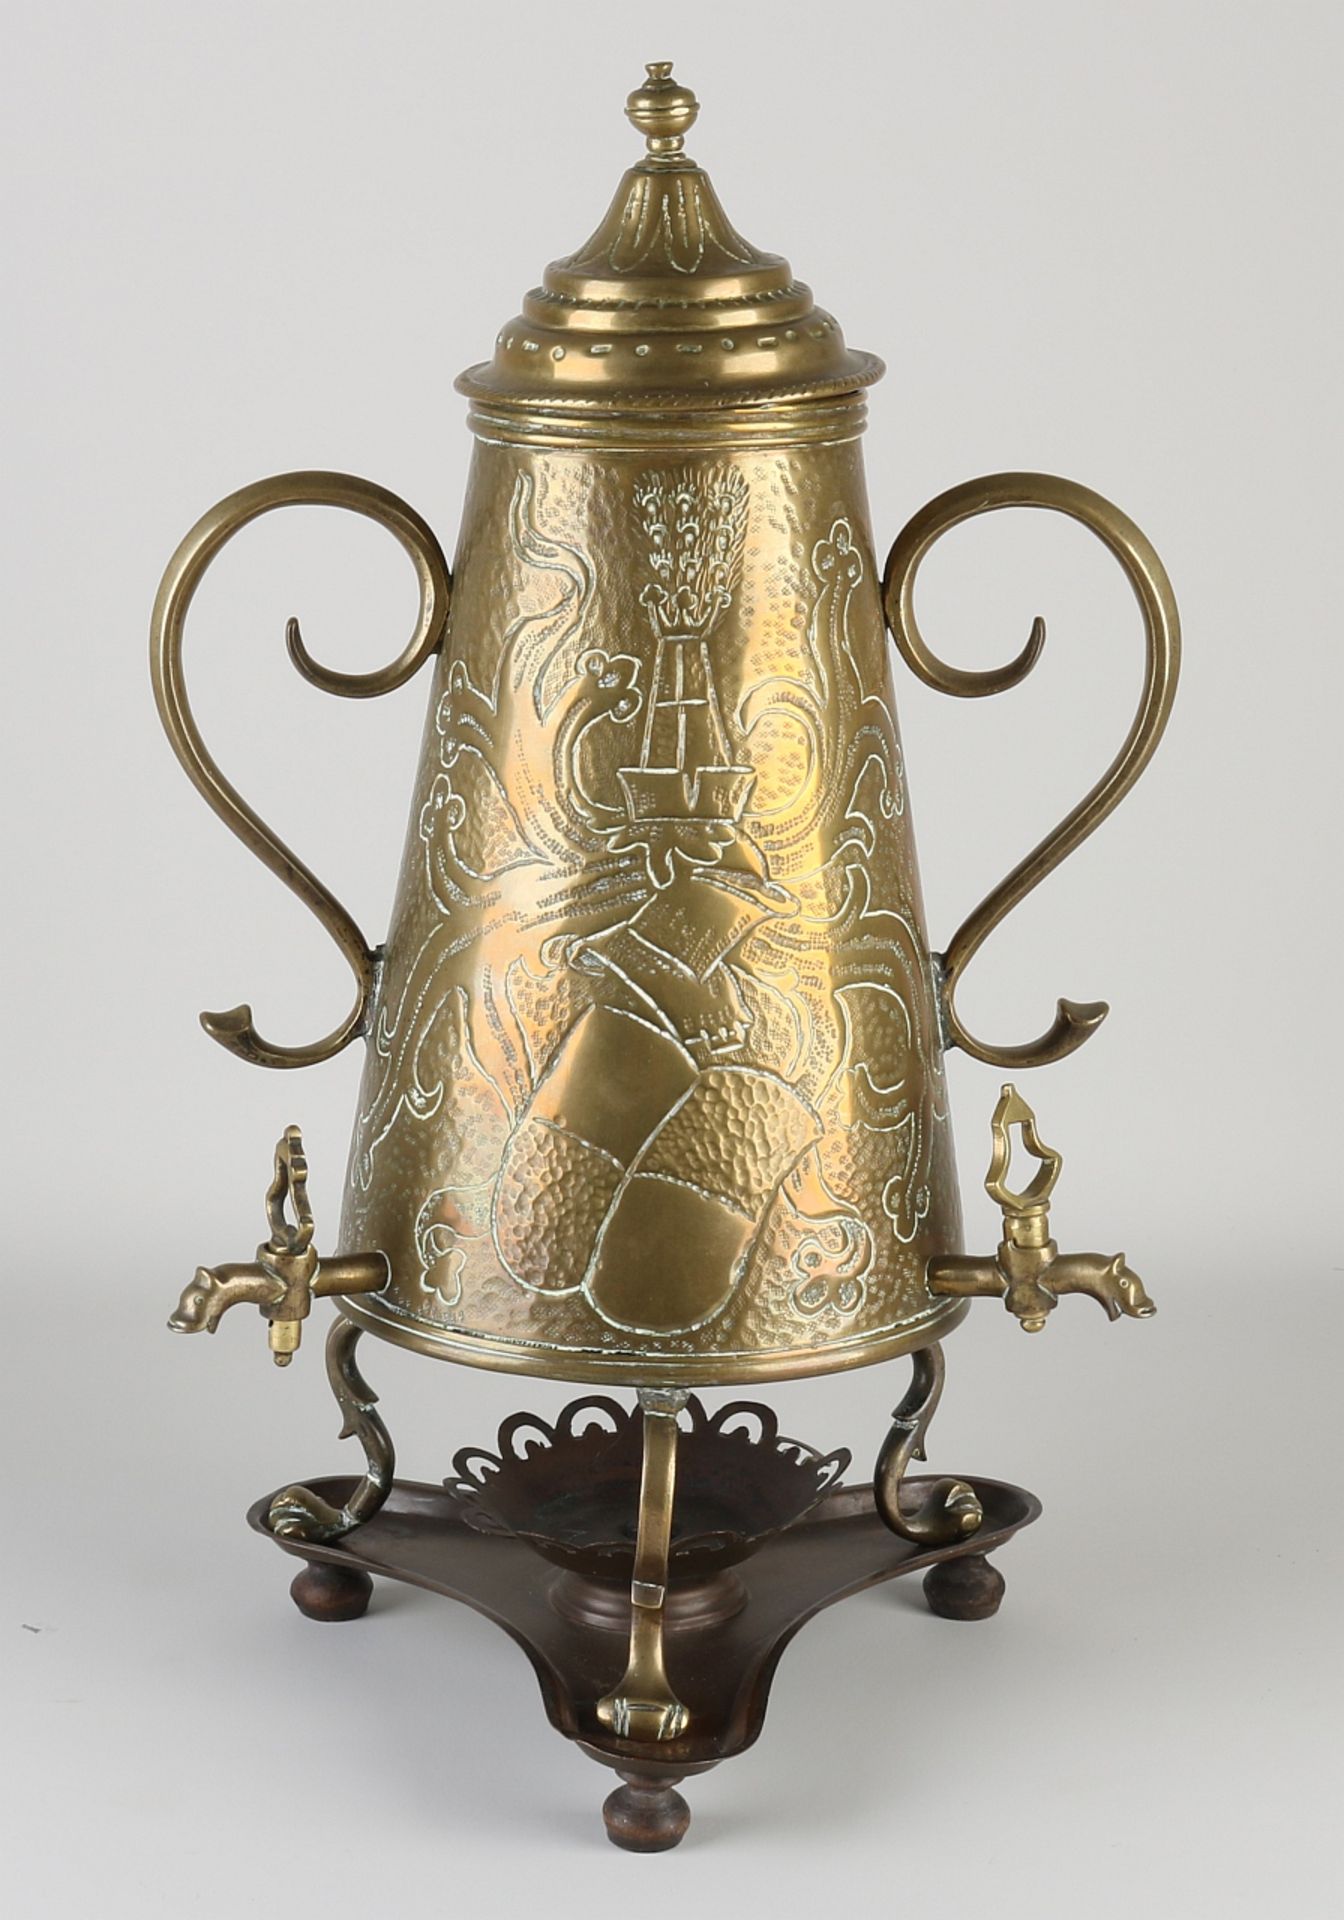 Amsterdam tap jug with city coat of arms - Image 2 of 2